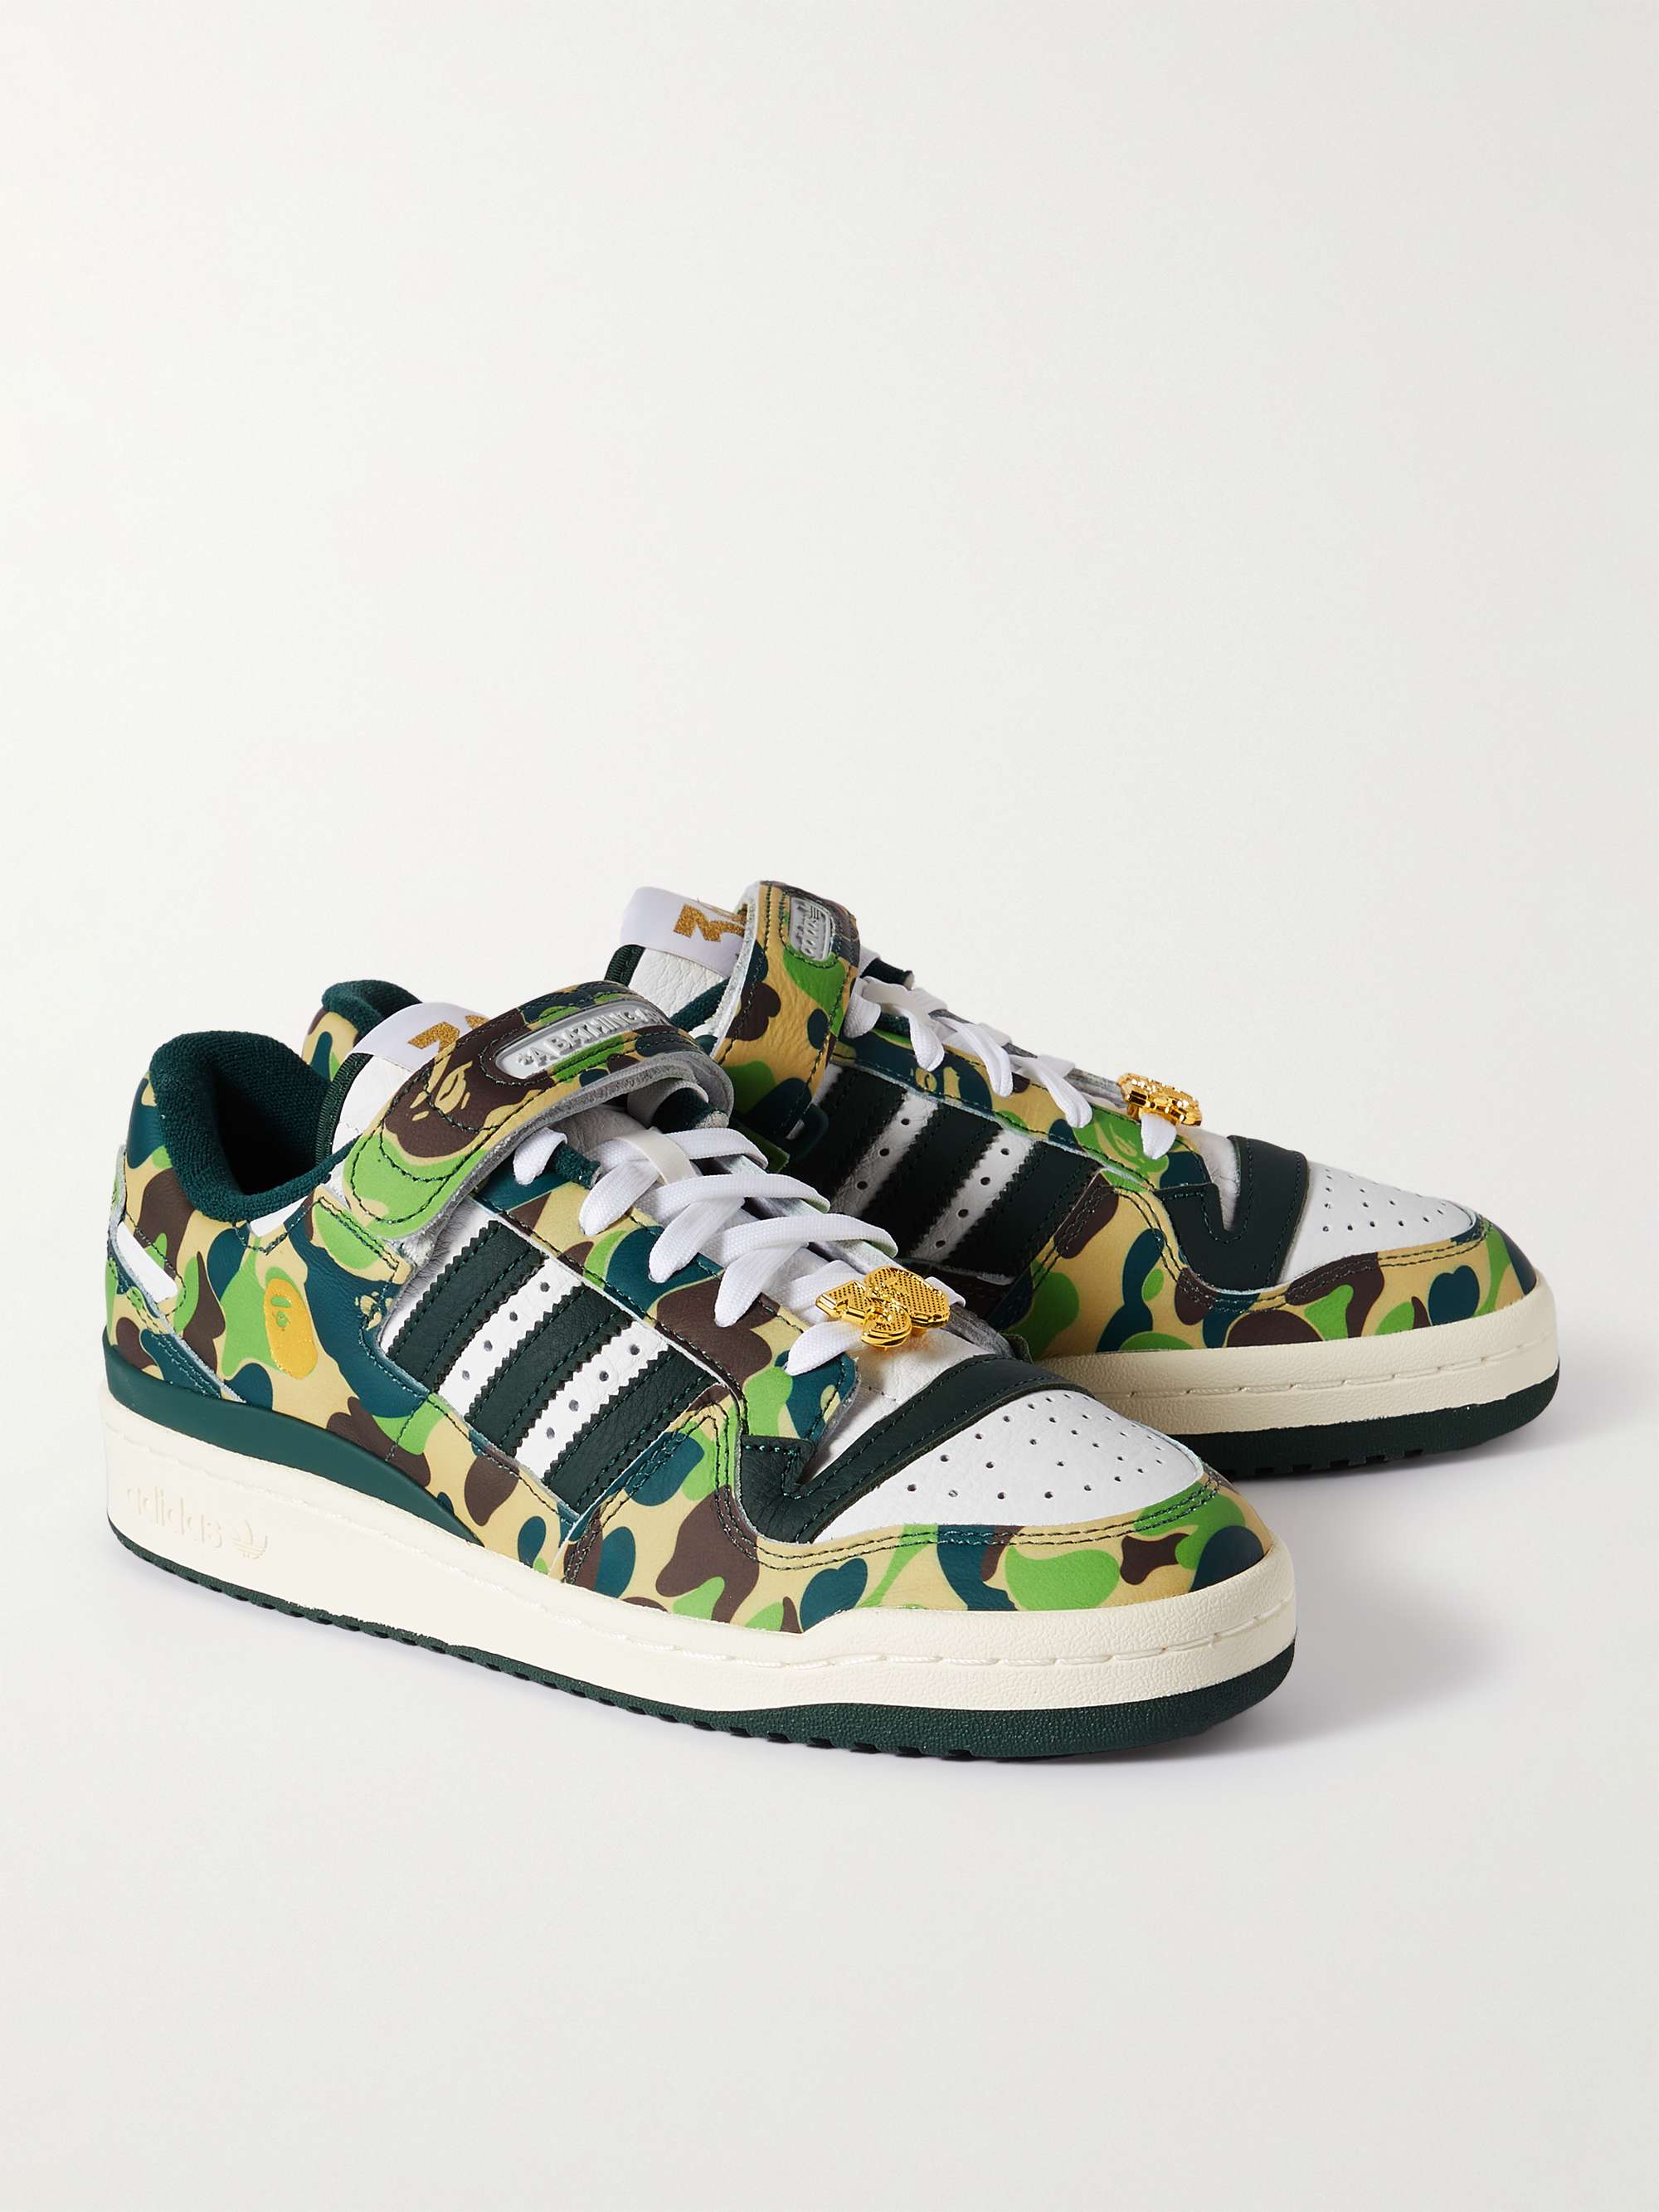 ADIDAS ORIGINALS + A Bathing Ape Forum 84 Low Embellished Printed Leather  Sneakers | MR PORTER